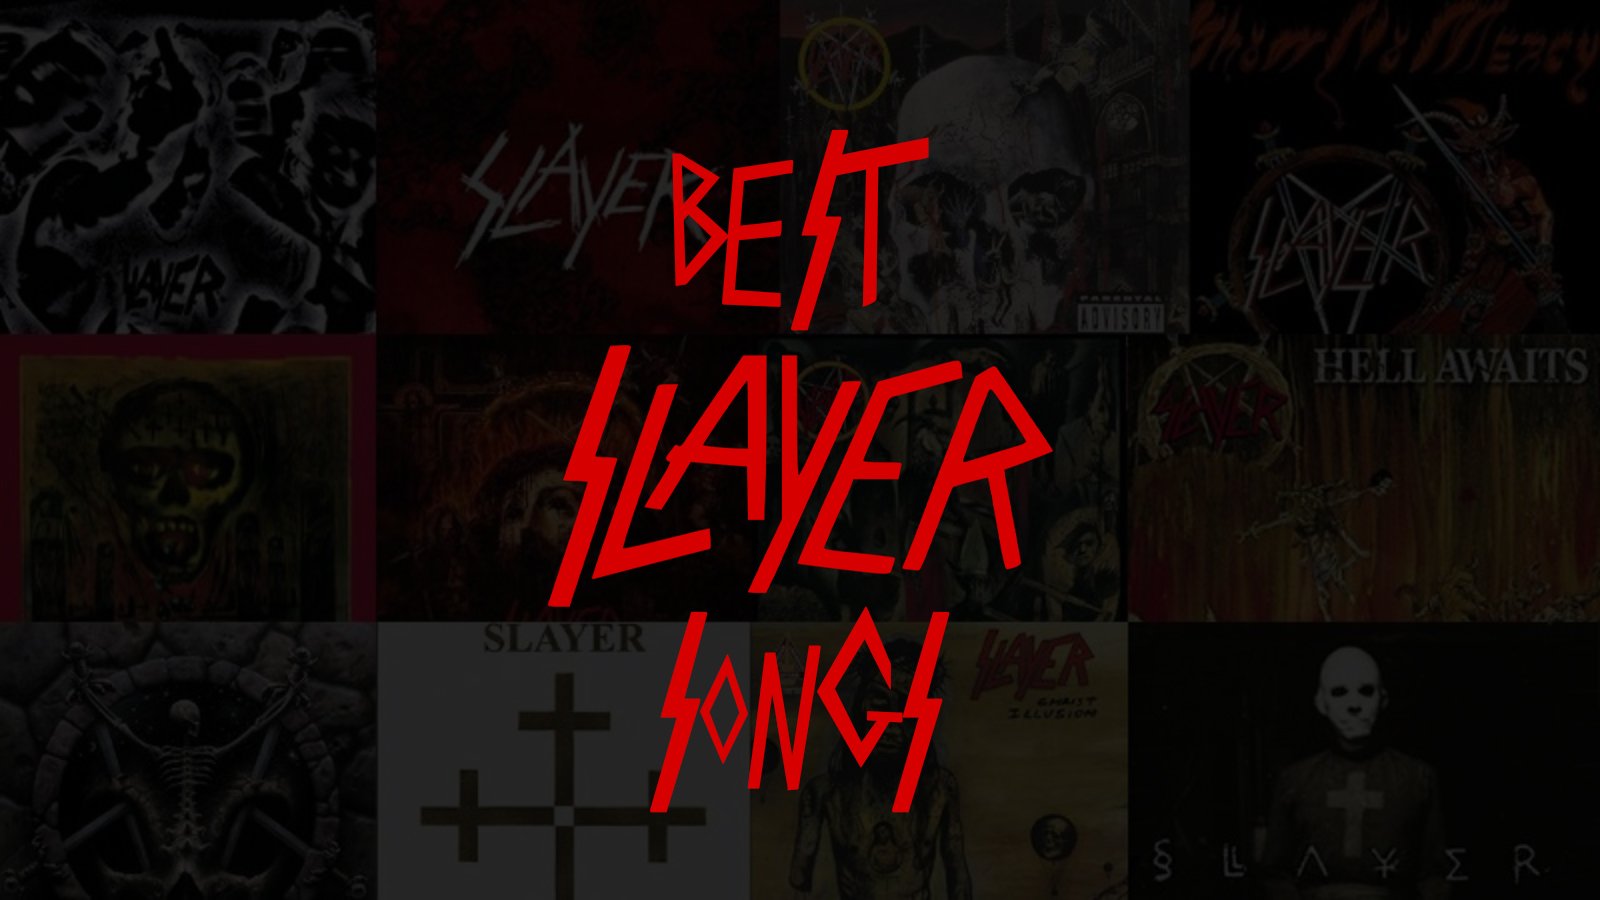 The 15 Best Slayer Songs of All Time